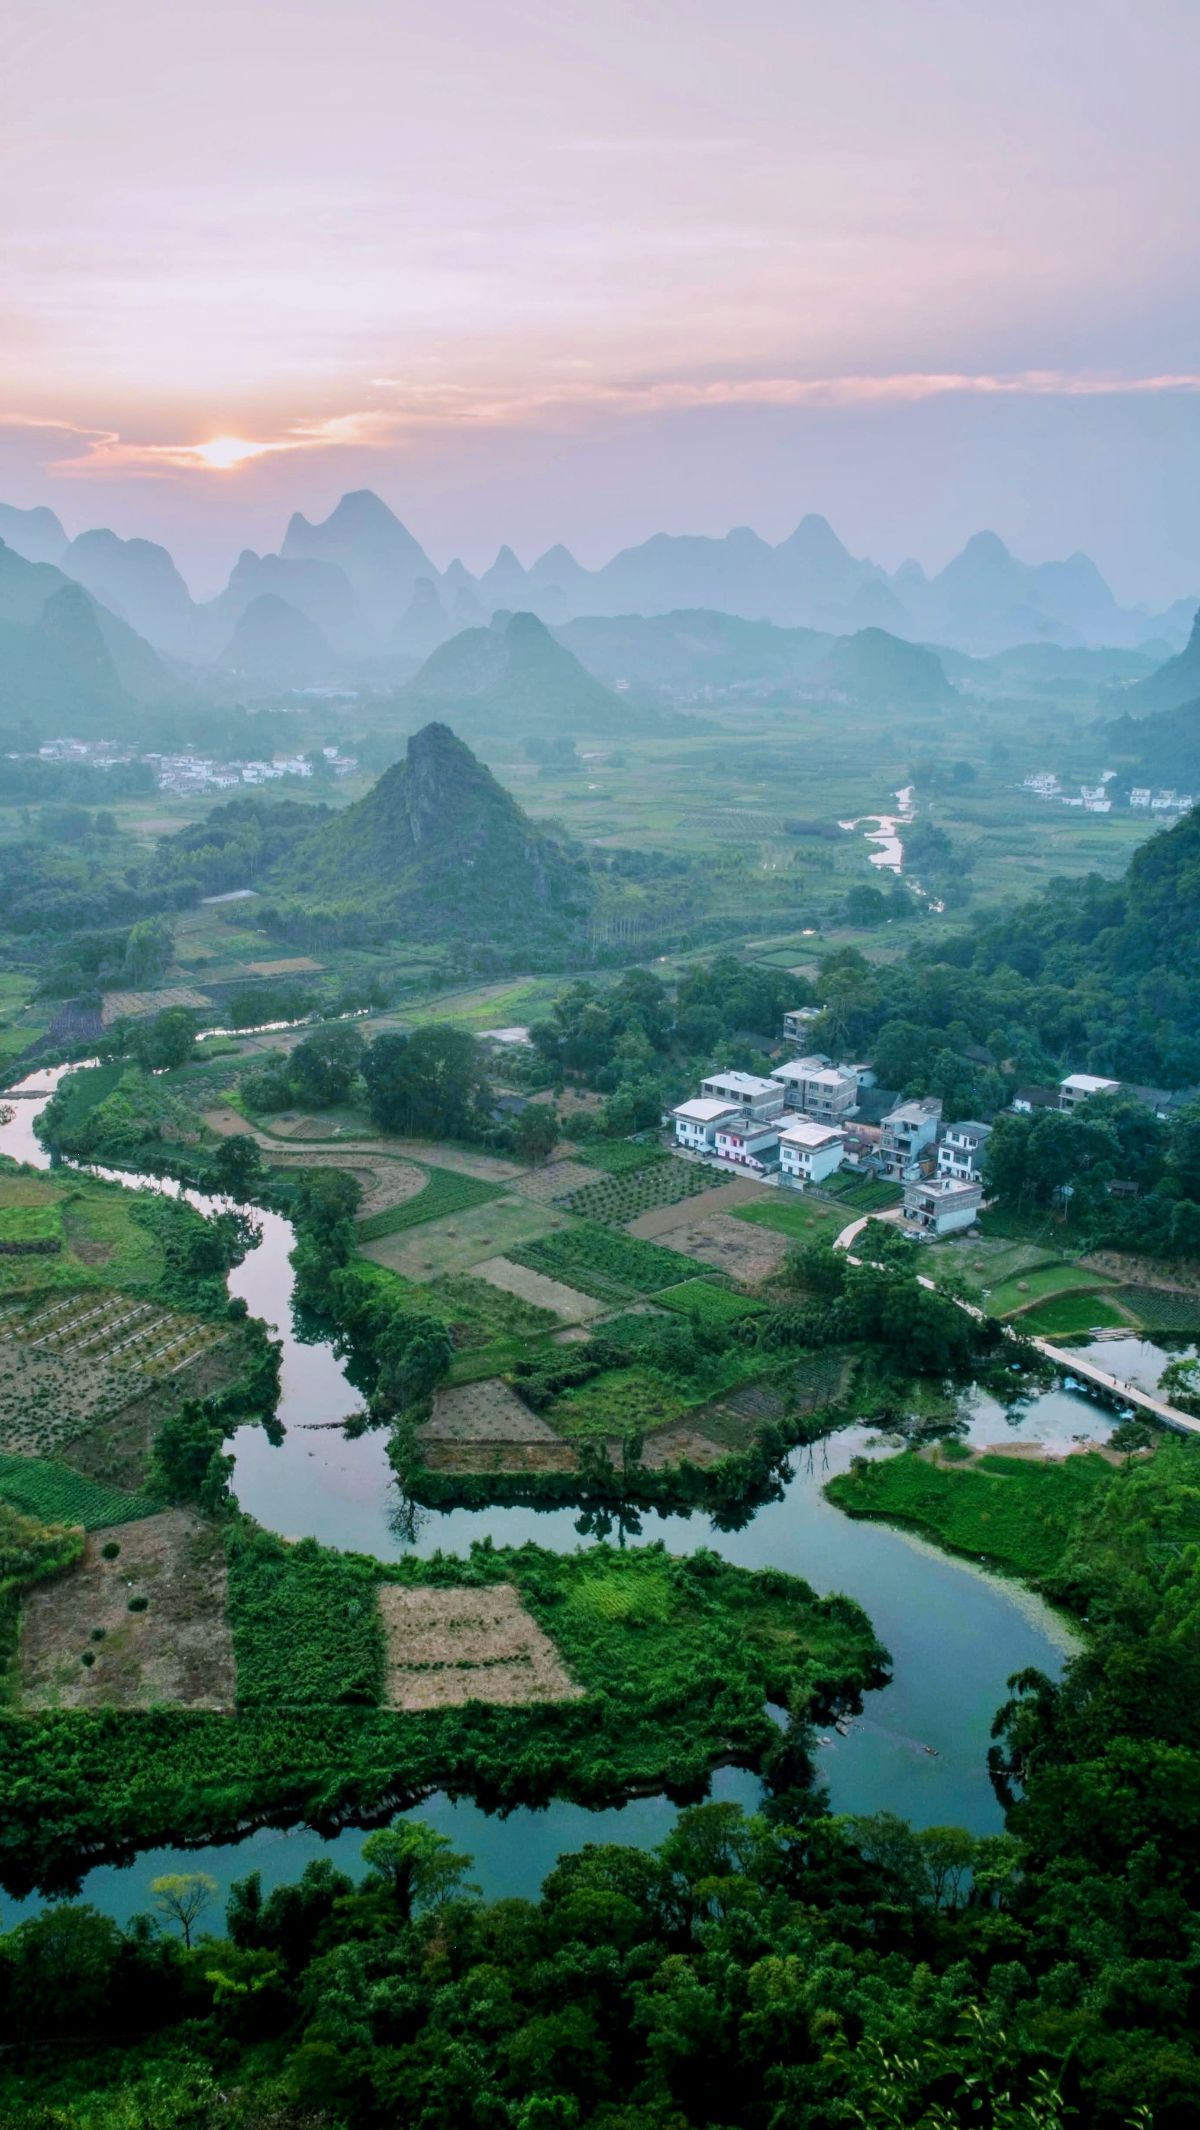 5. Guilin & Yangshuo — China's Most Beautiful Landscape<br><br><br><br> Guilin and Yangshuo in China are famous for their dreamlike landscapes. They have towering limestone peaks that appear dramatically from the earth.